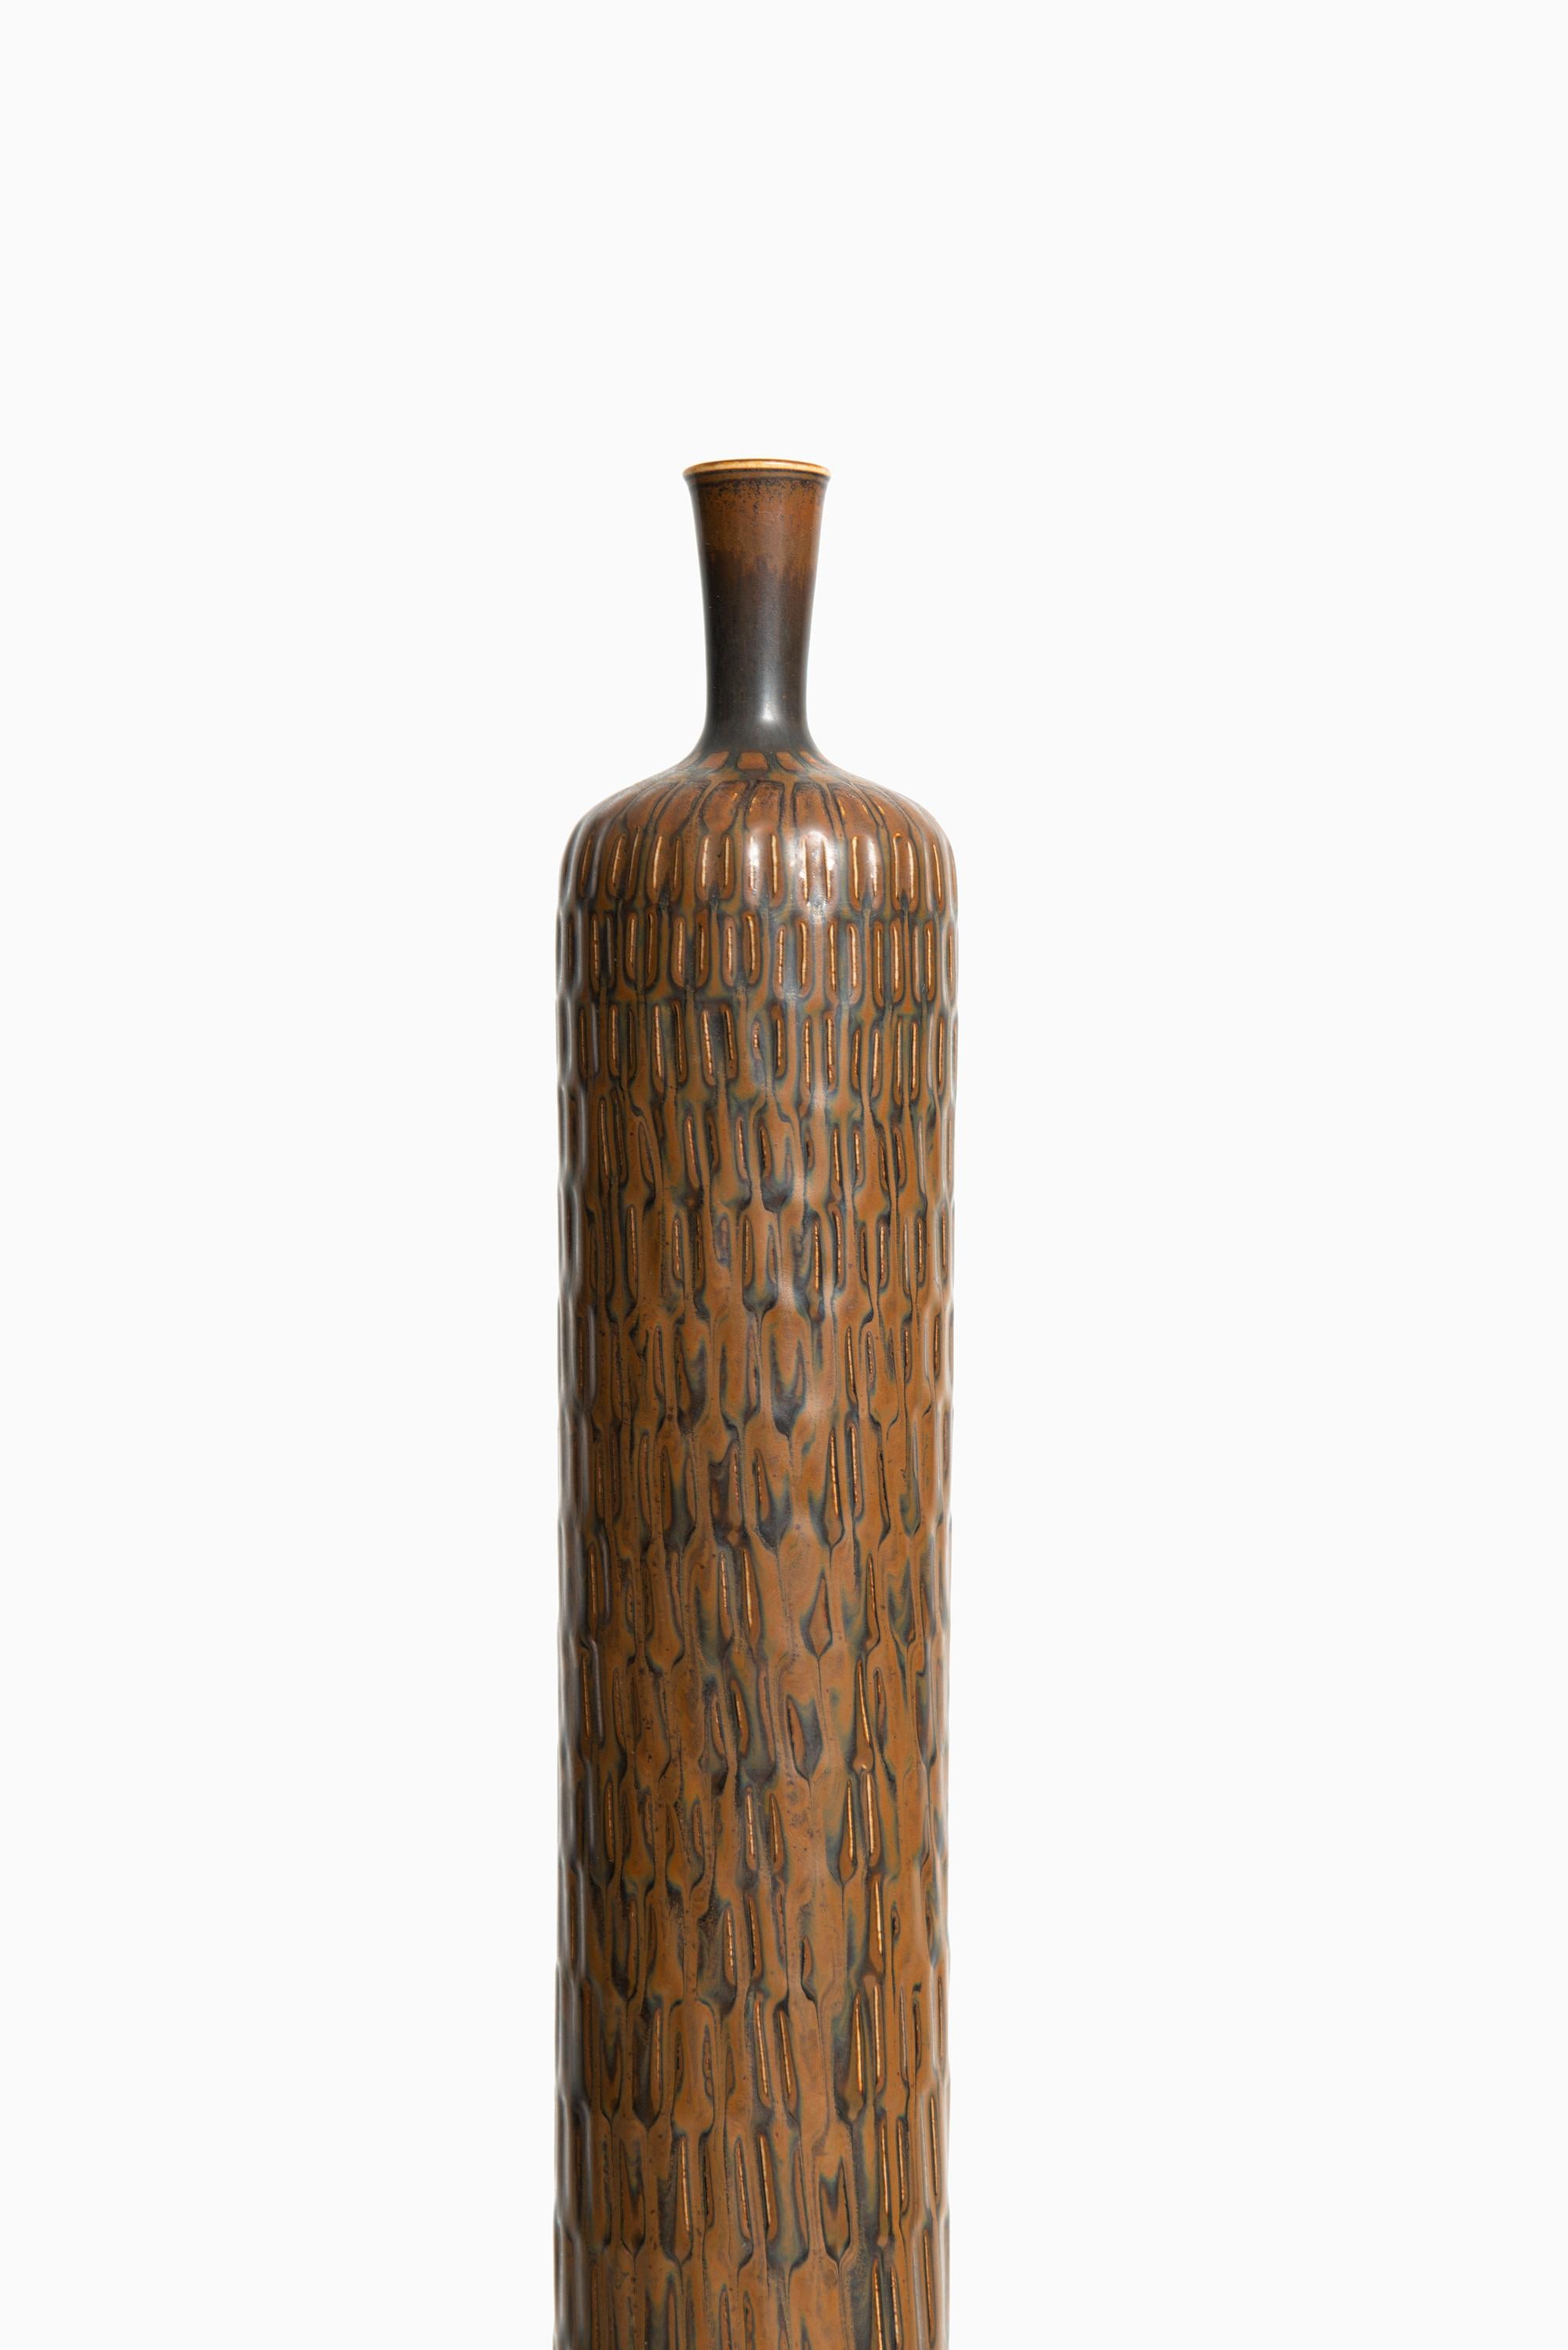 Rare and tall ceramic vase designed by Stig Lindberg. Produced by Gustavsberg in Sweden.